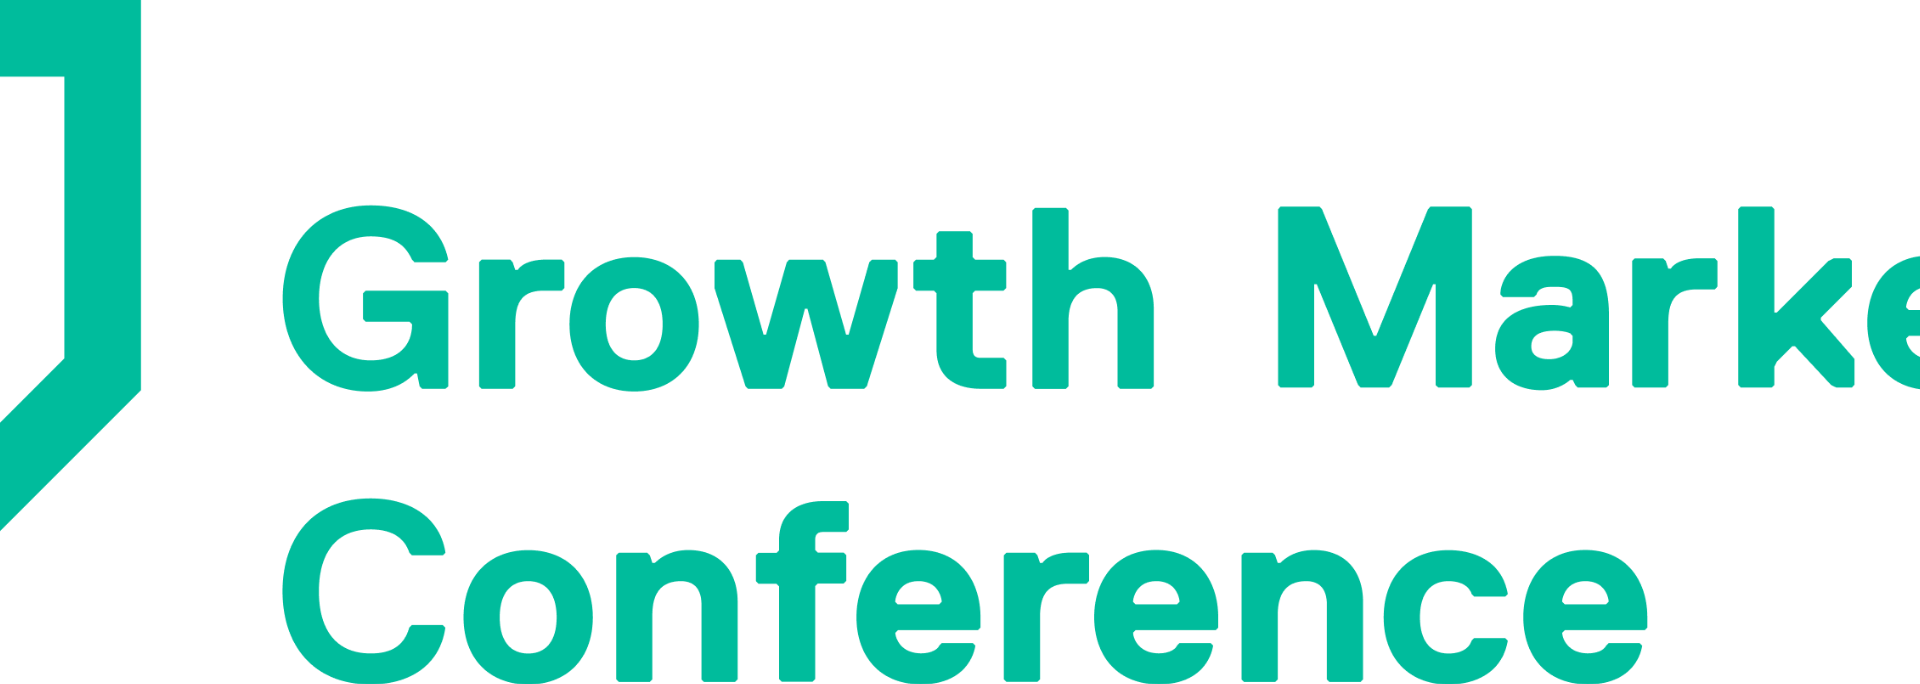 Growth Marketing Conferences